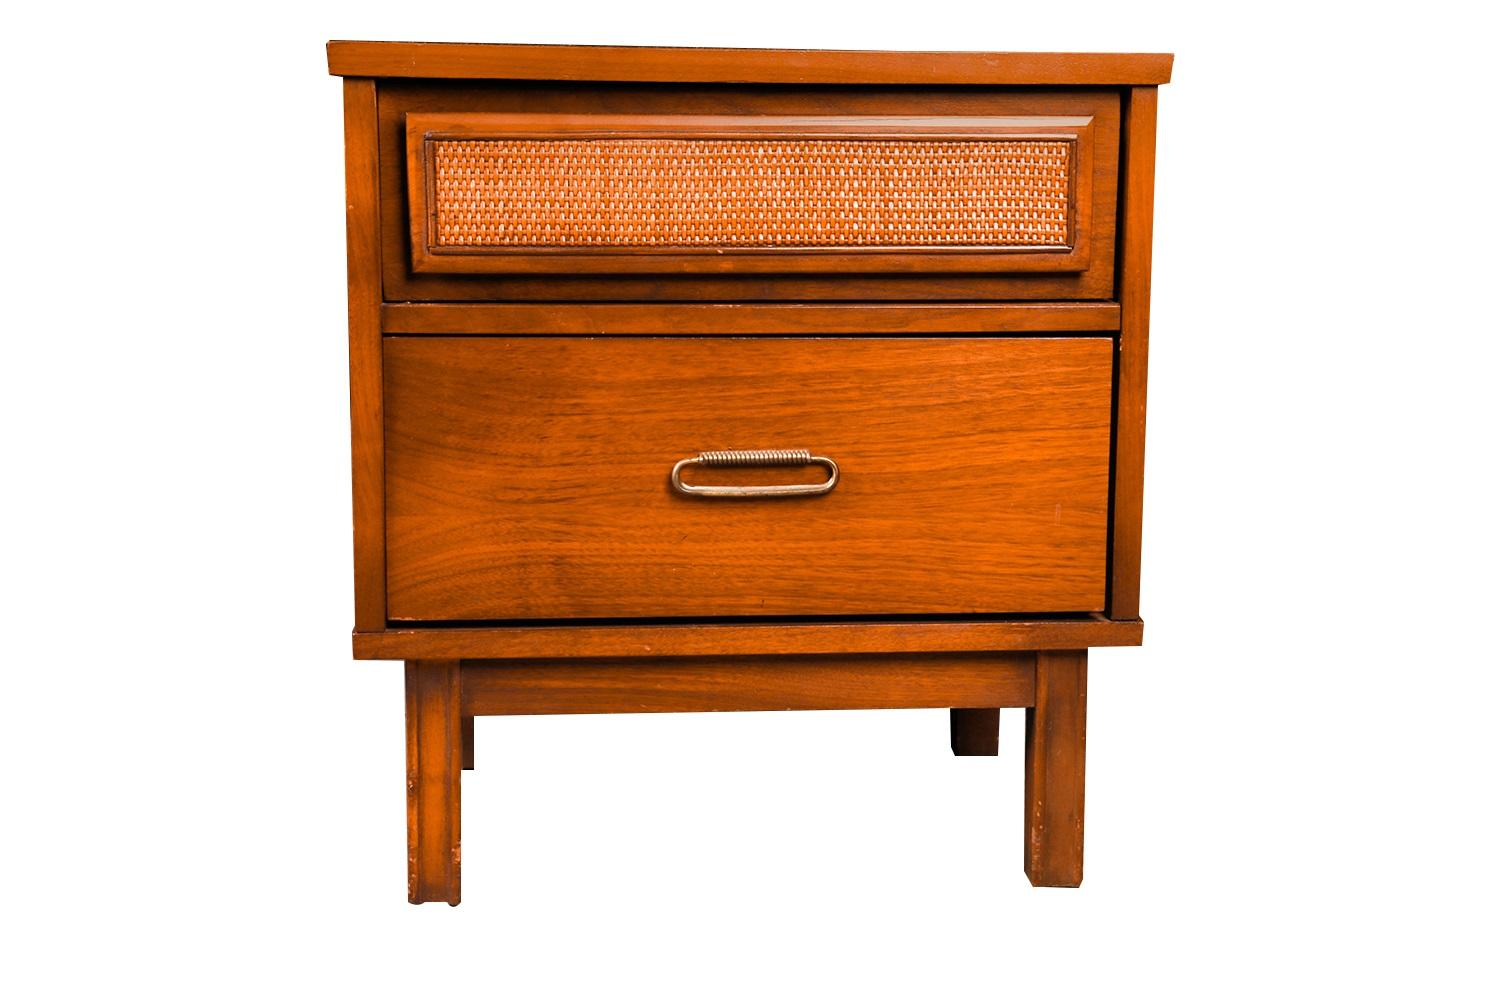 A beautiful mid-century nightstand/end table with cane front drawer panel. Exceptional construction and style. This is a very simple yet modern design. Features beautiful walnut medium tones with attractive metal brass pull. Drawer is accented with